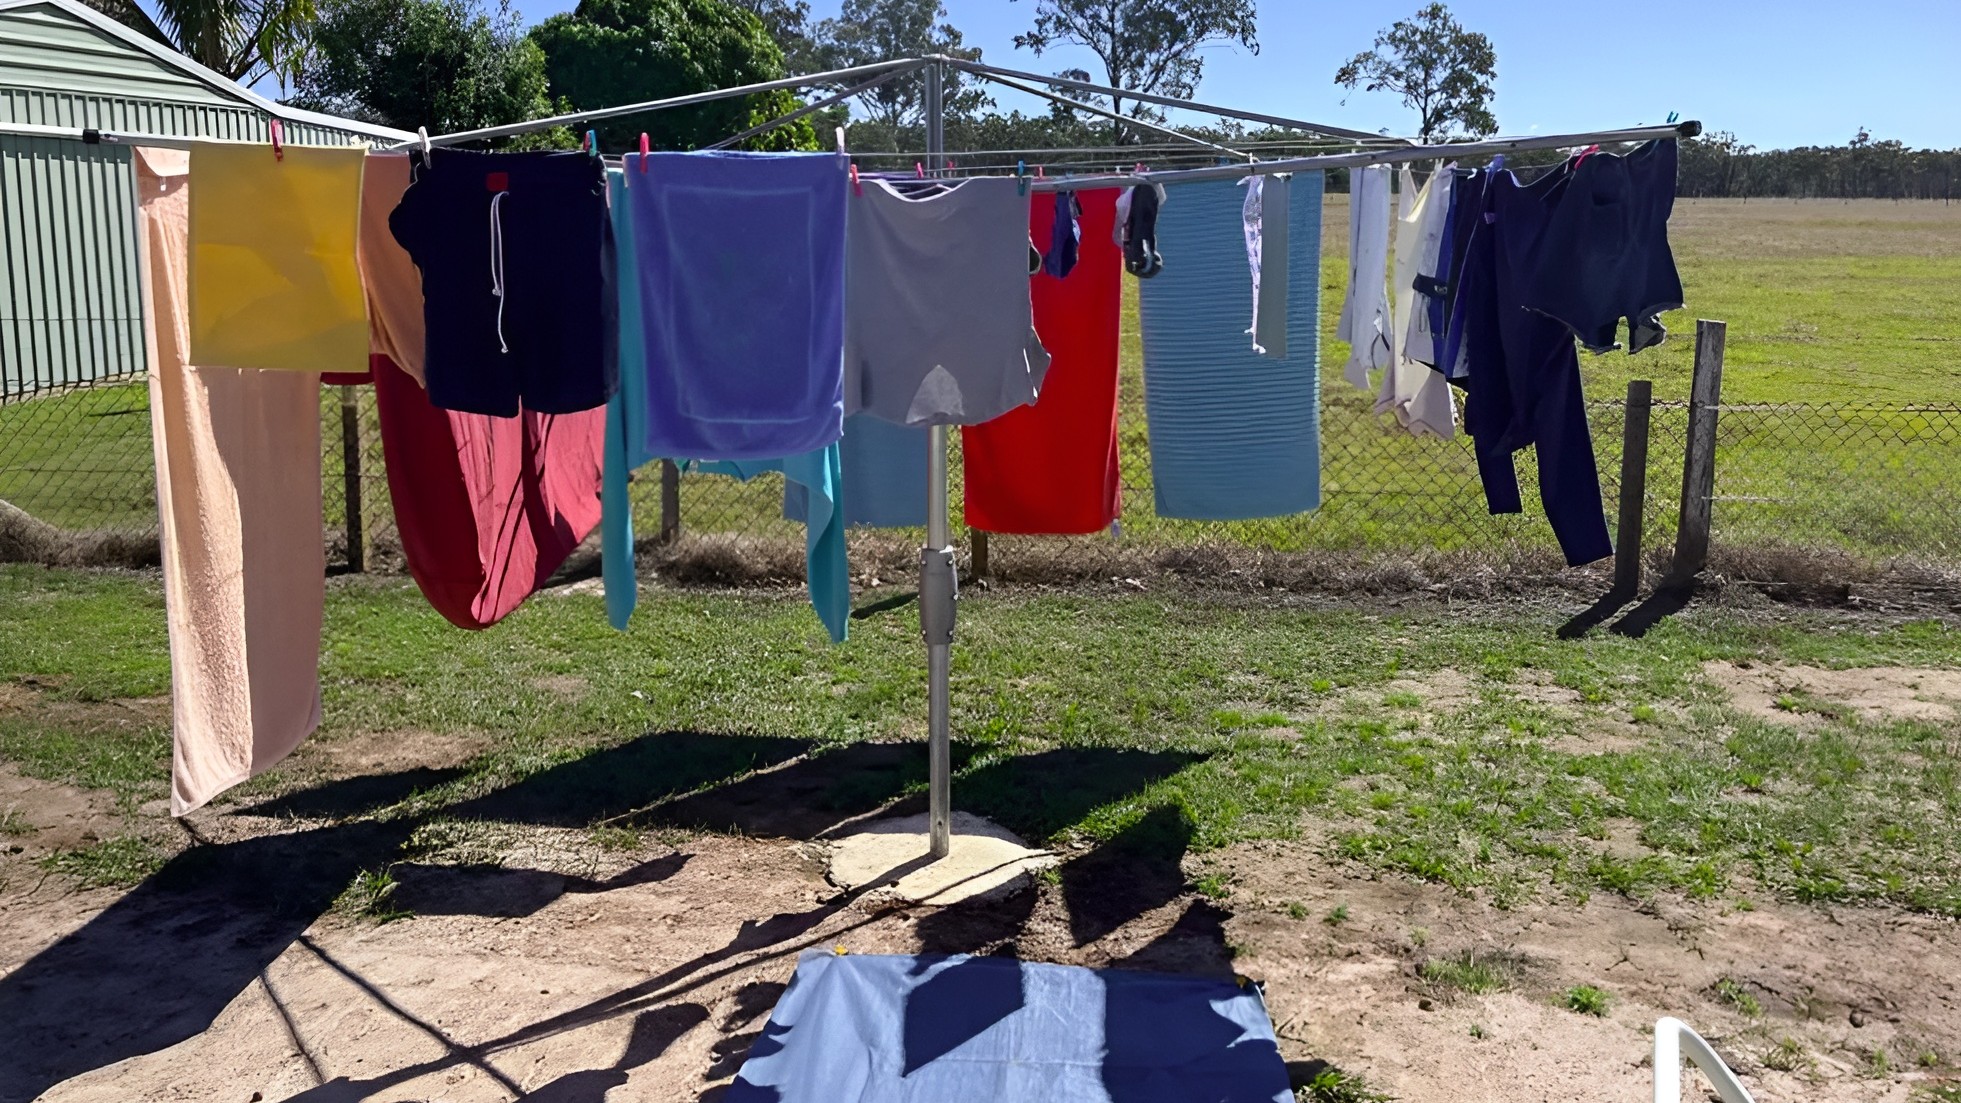 Austral Super 4 Clothes Hoist Review: Sturdy and Space-Saving Drying Solution